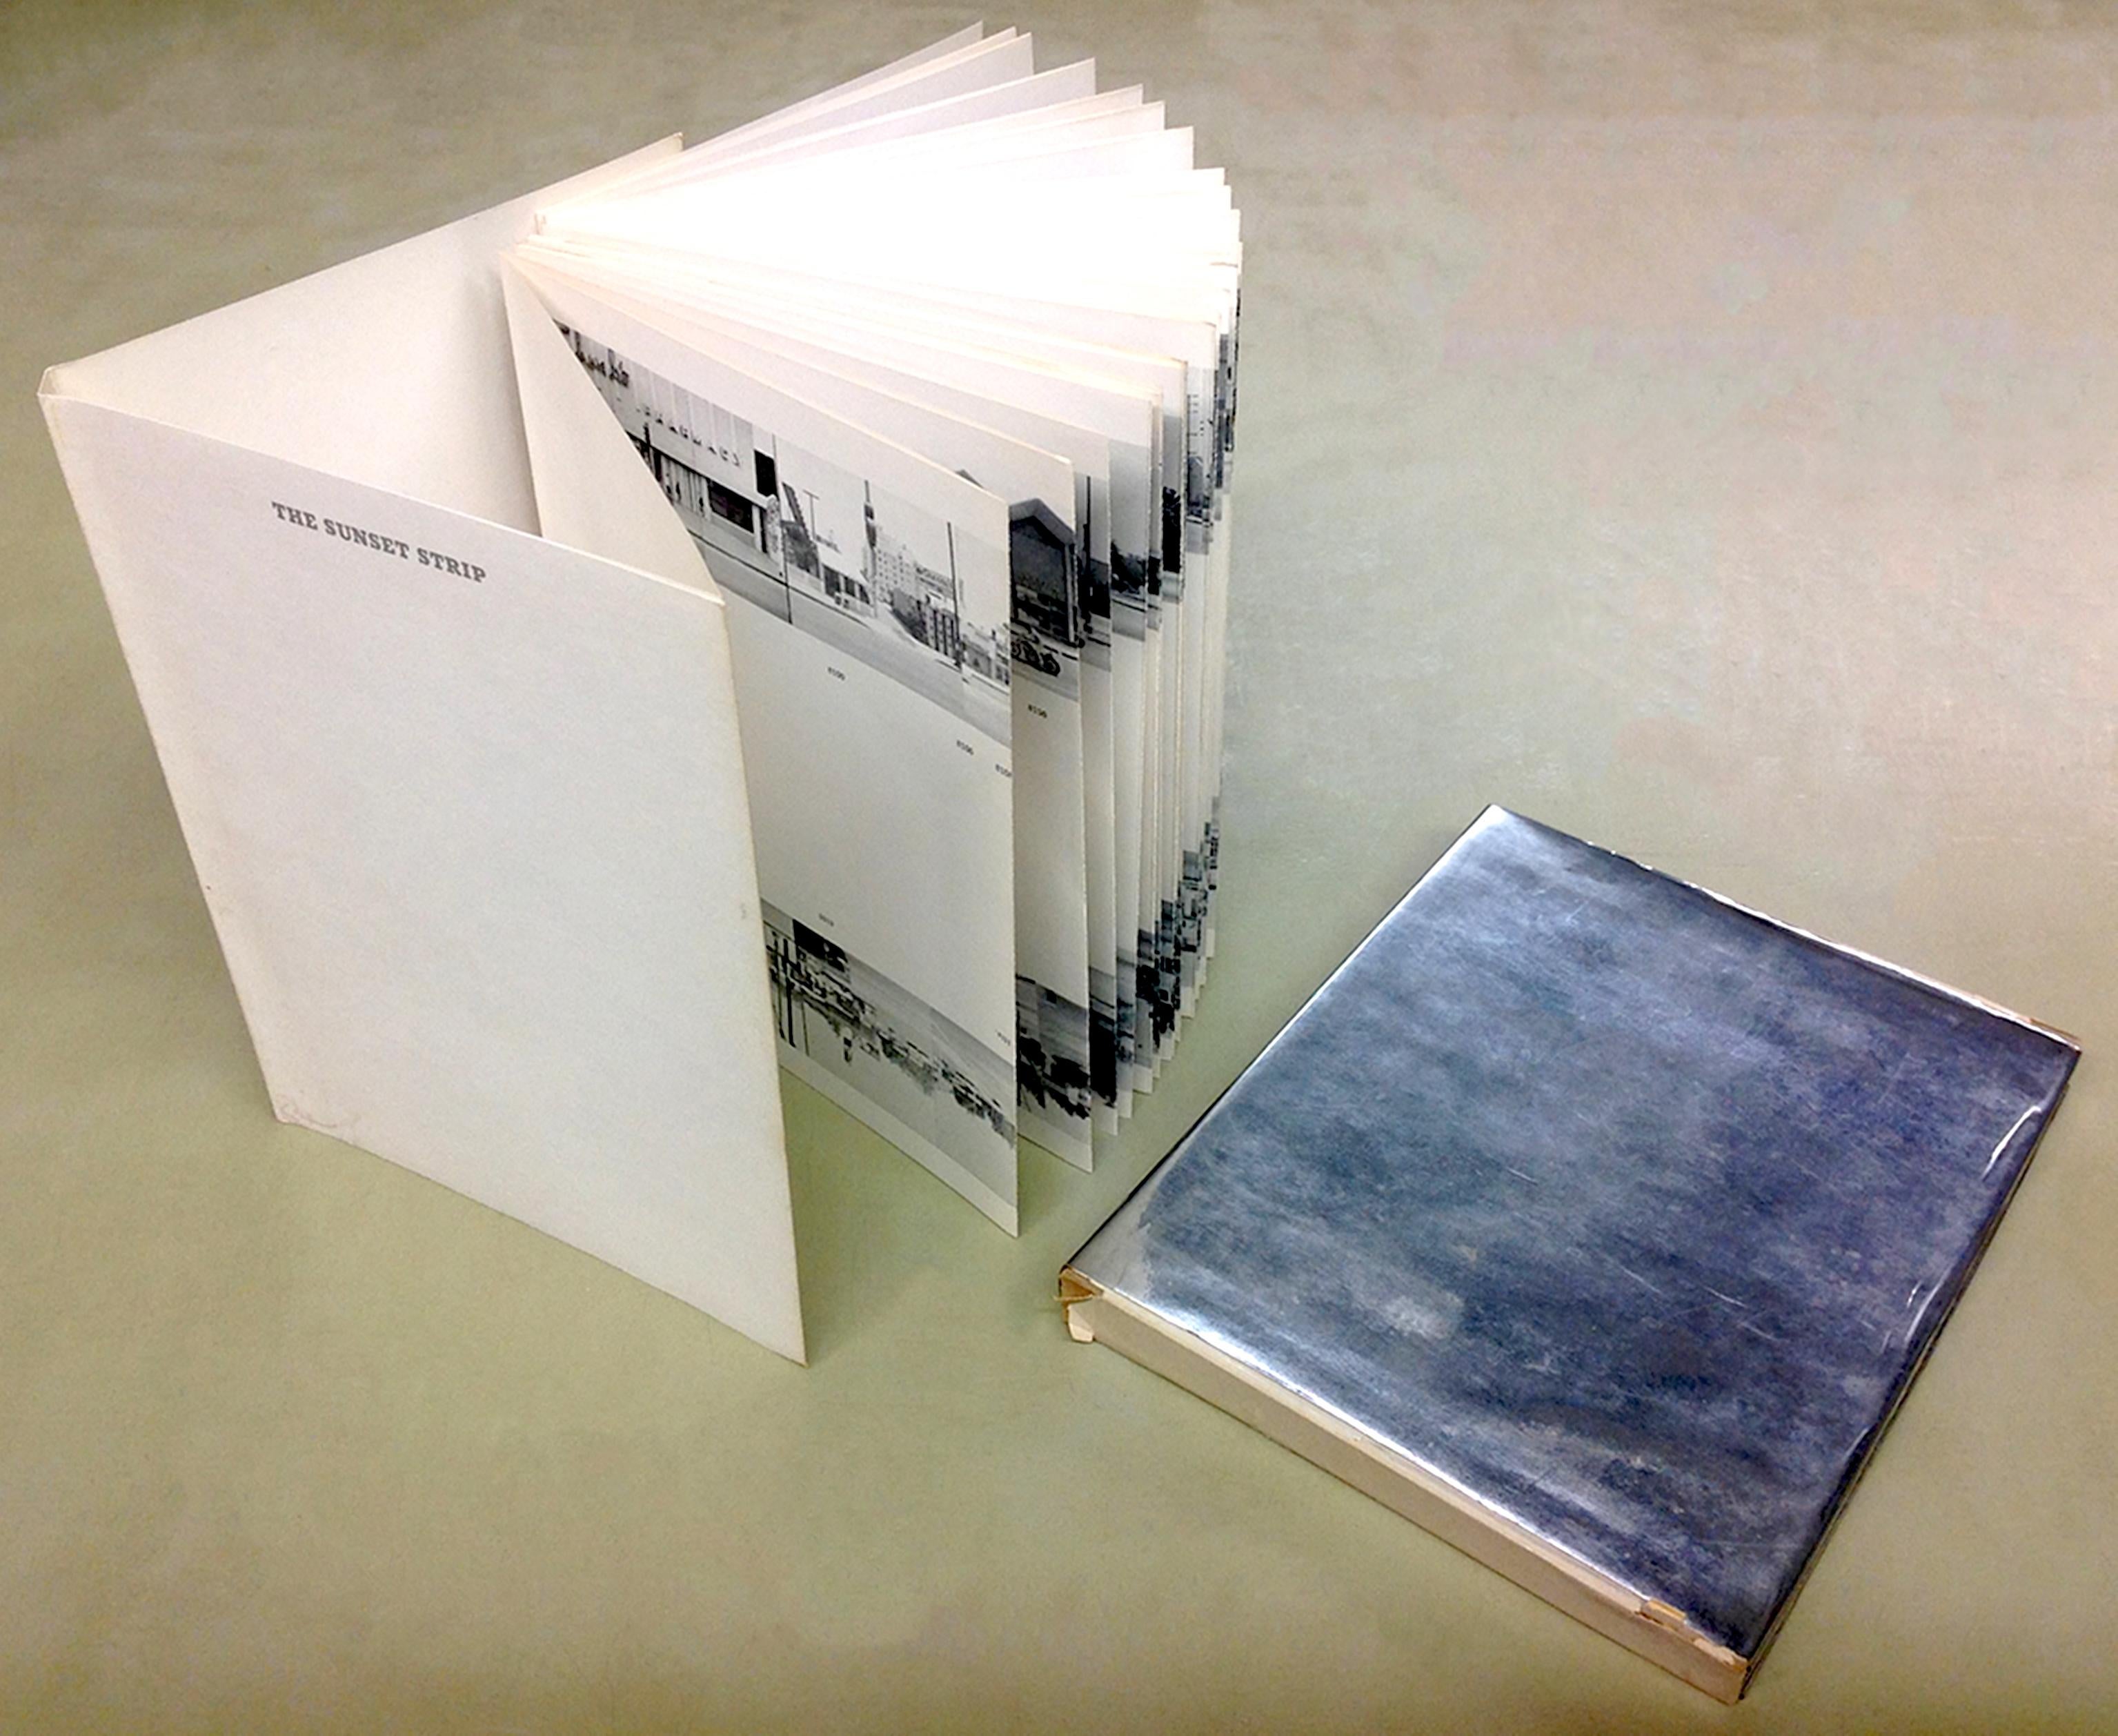 Every Building on the Sunset Strip, 1st Edition, Signed & inscribed w/provenance - Pop Art Mixed Media Art by Ed Ruscha